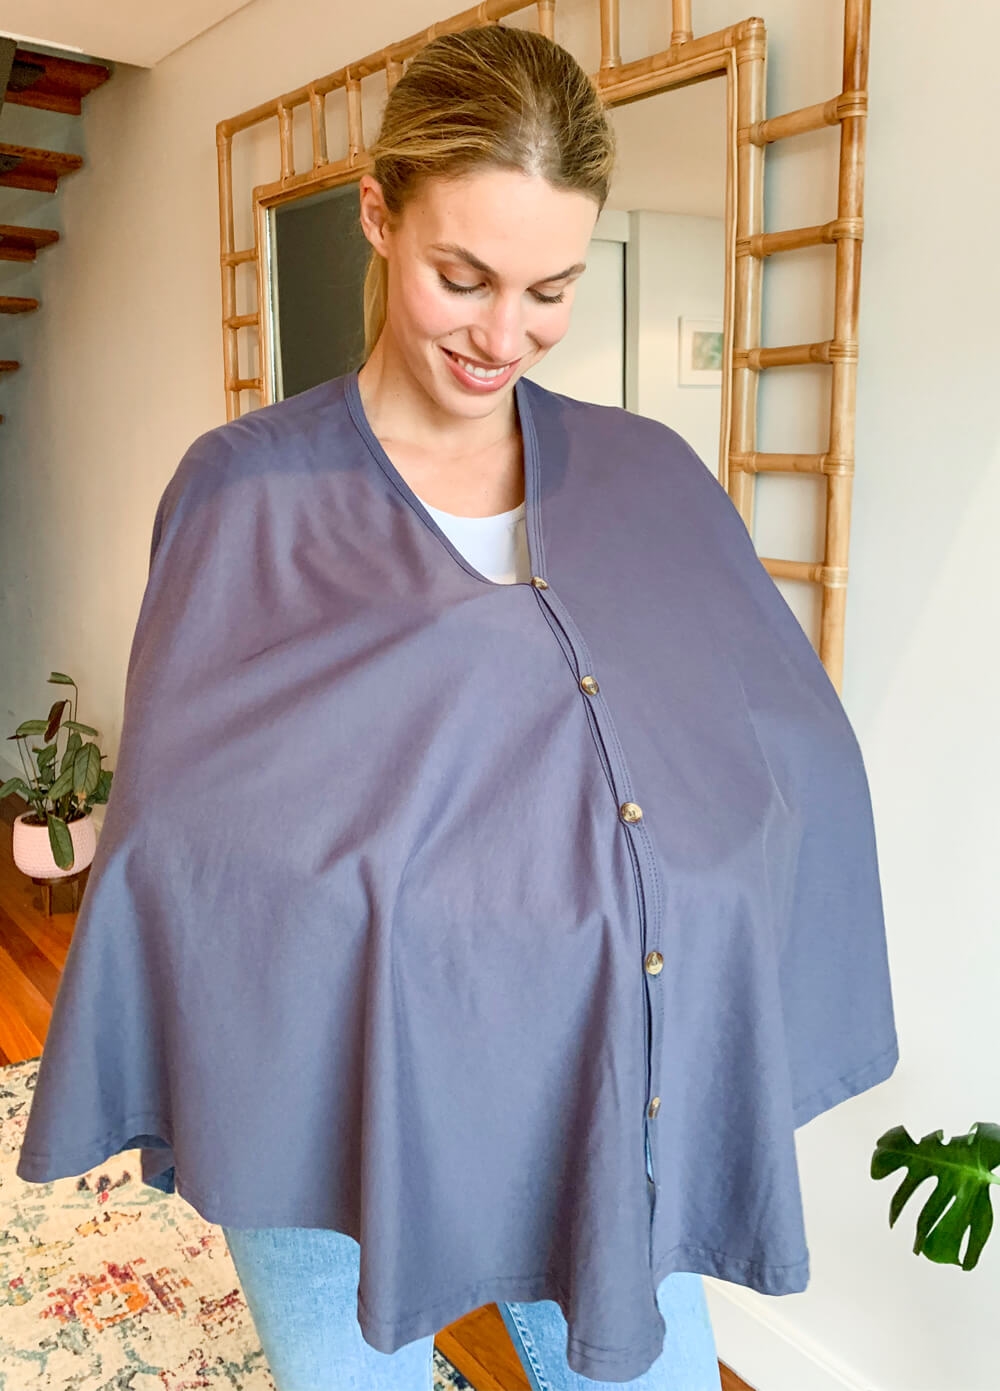 Lait & Co - Nursing Couverture in Charcoal | Queen Bee